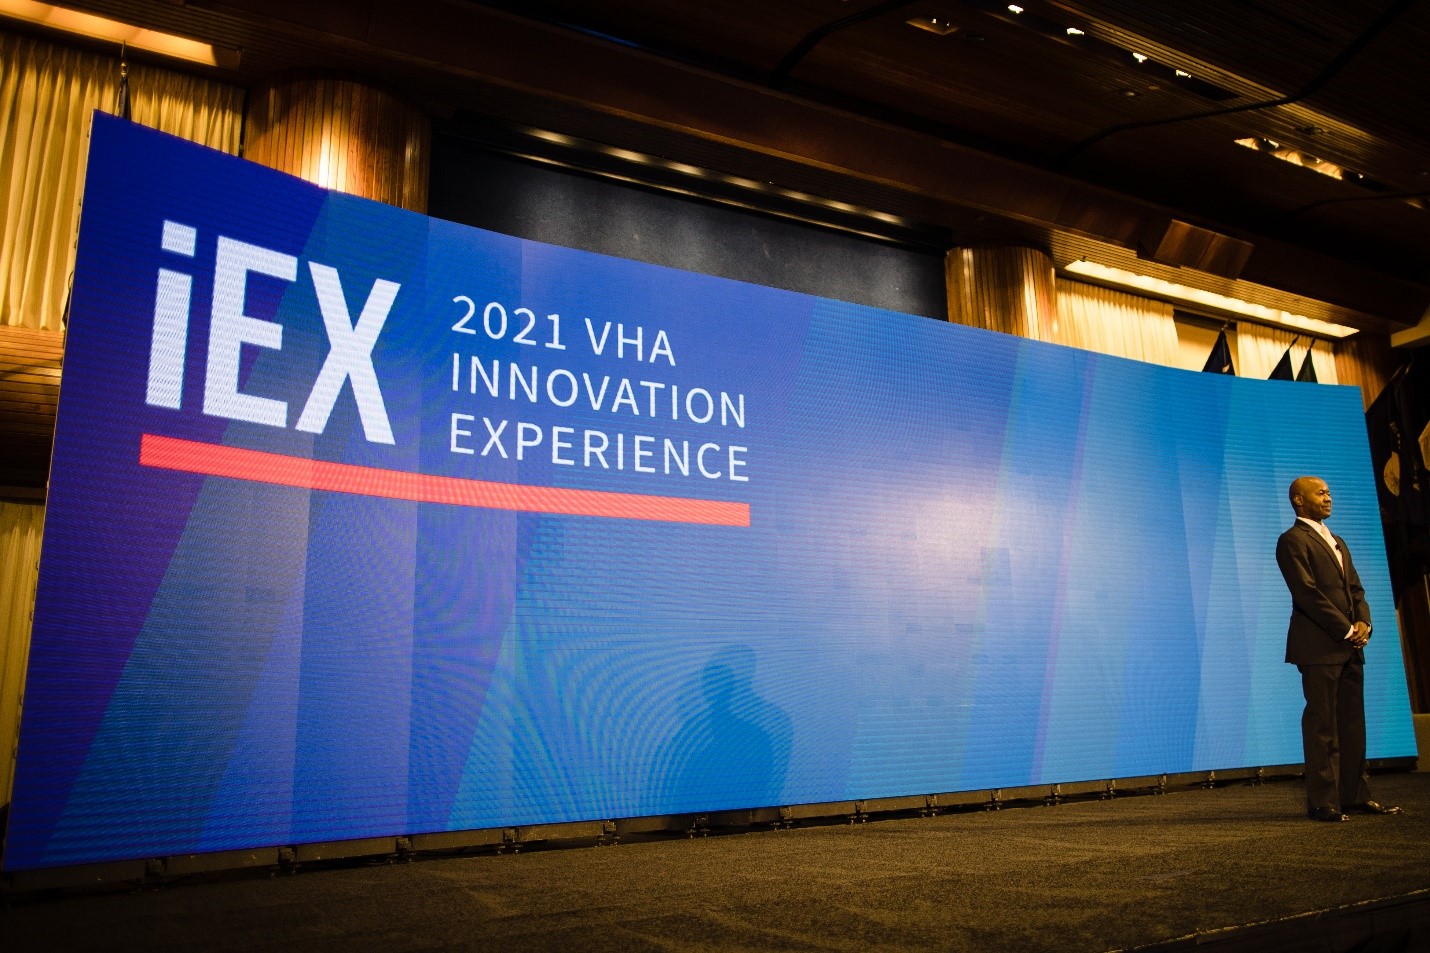 VHA Innovation Experience Header image mand on stage